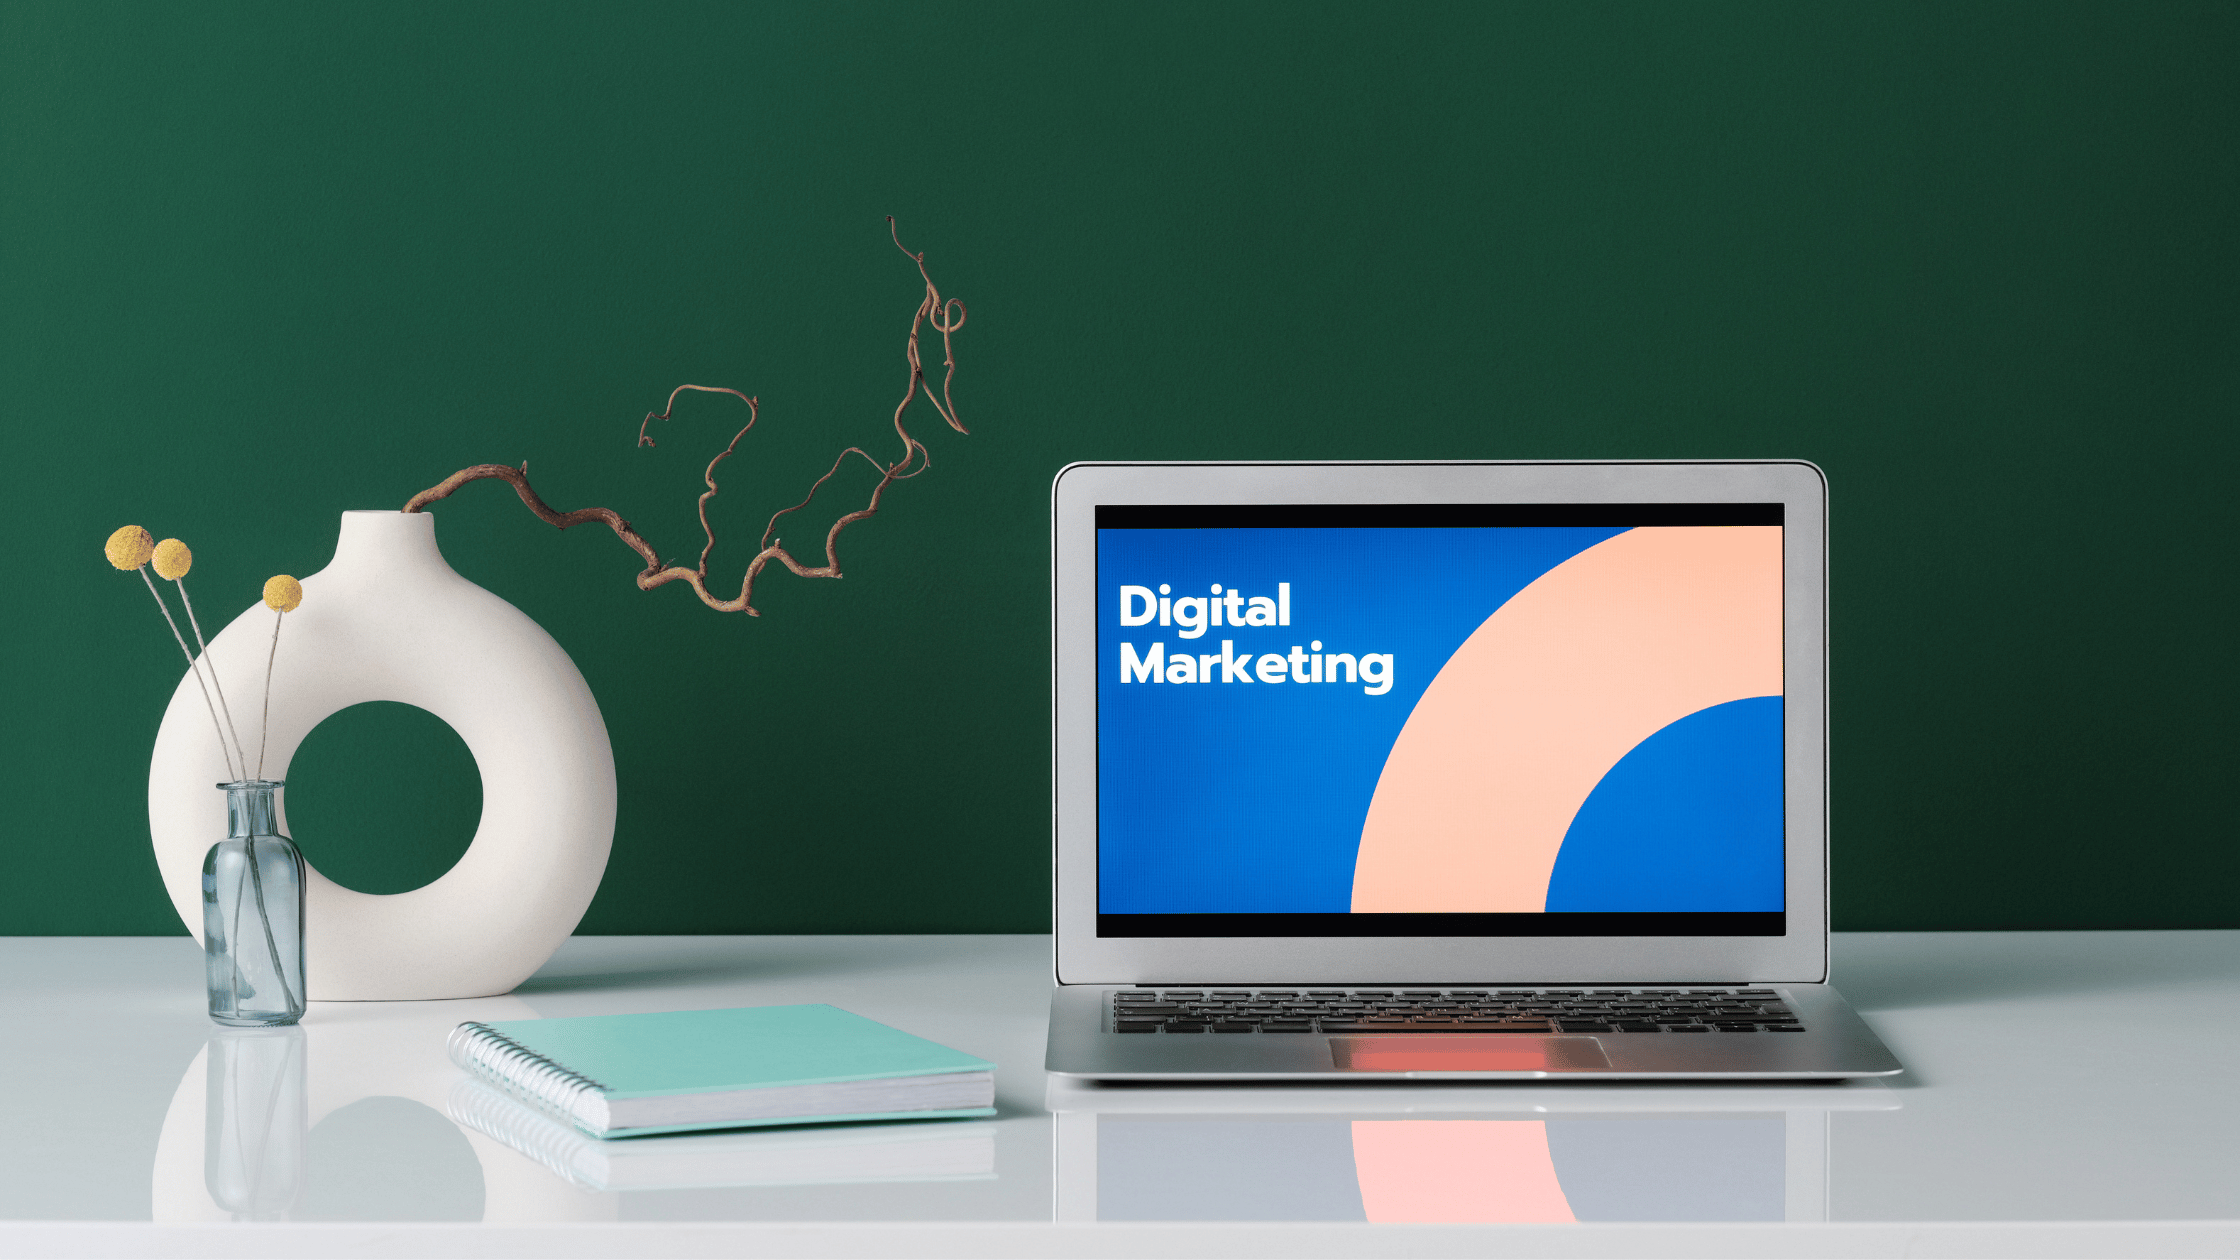 How Can You Find a Digital Marketing Agency